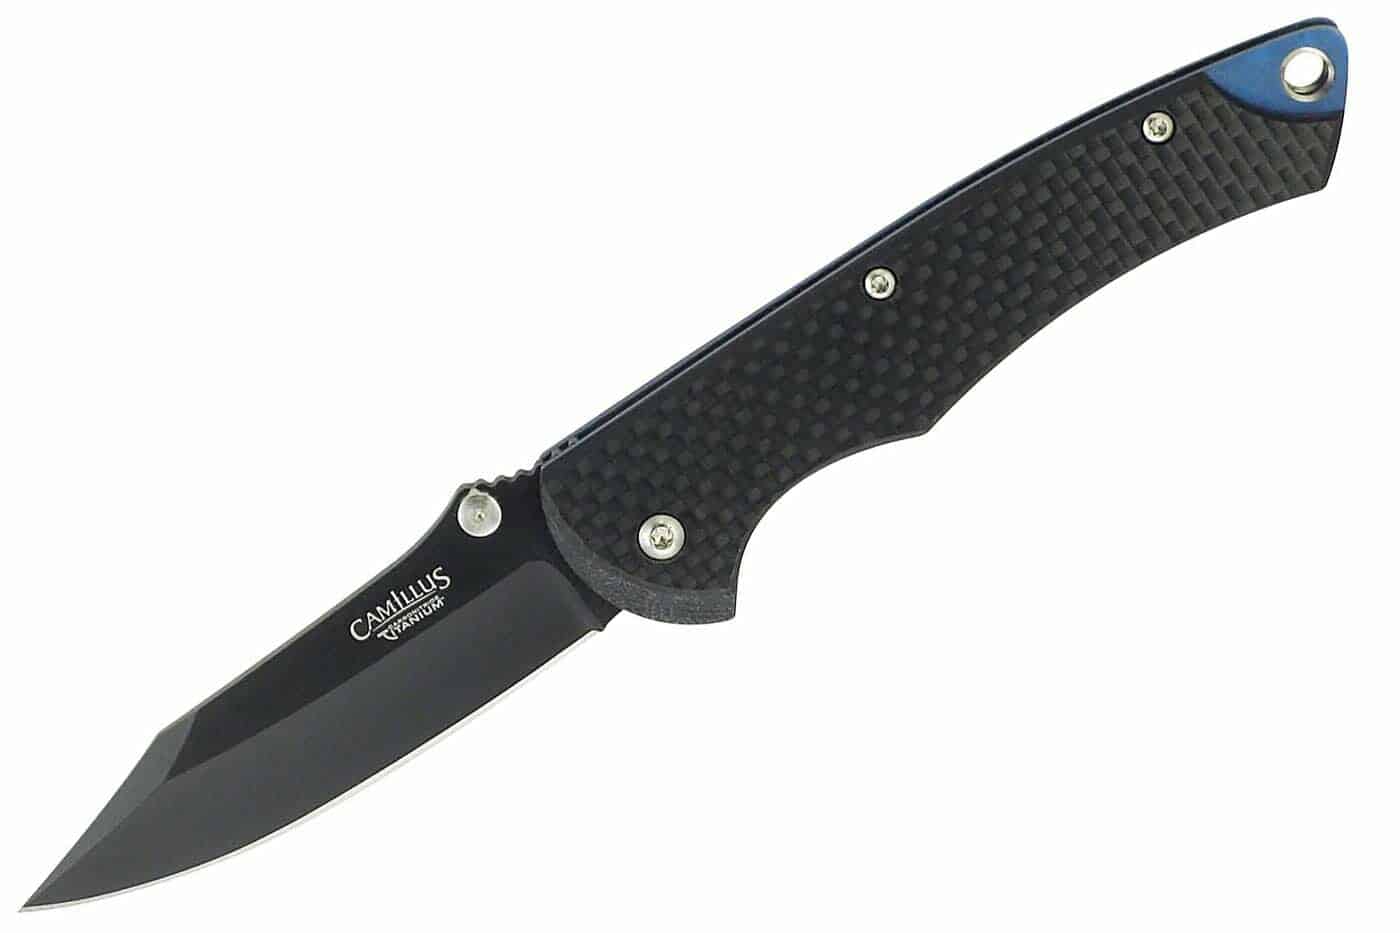 This relatively small tactical knife has a 2.75 inch blade and a carbon fiber handle. Pictured here on a white background. 